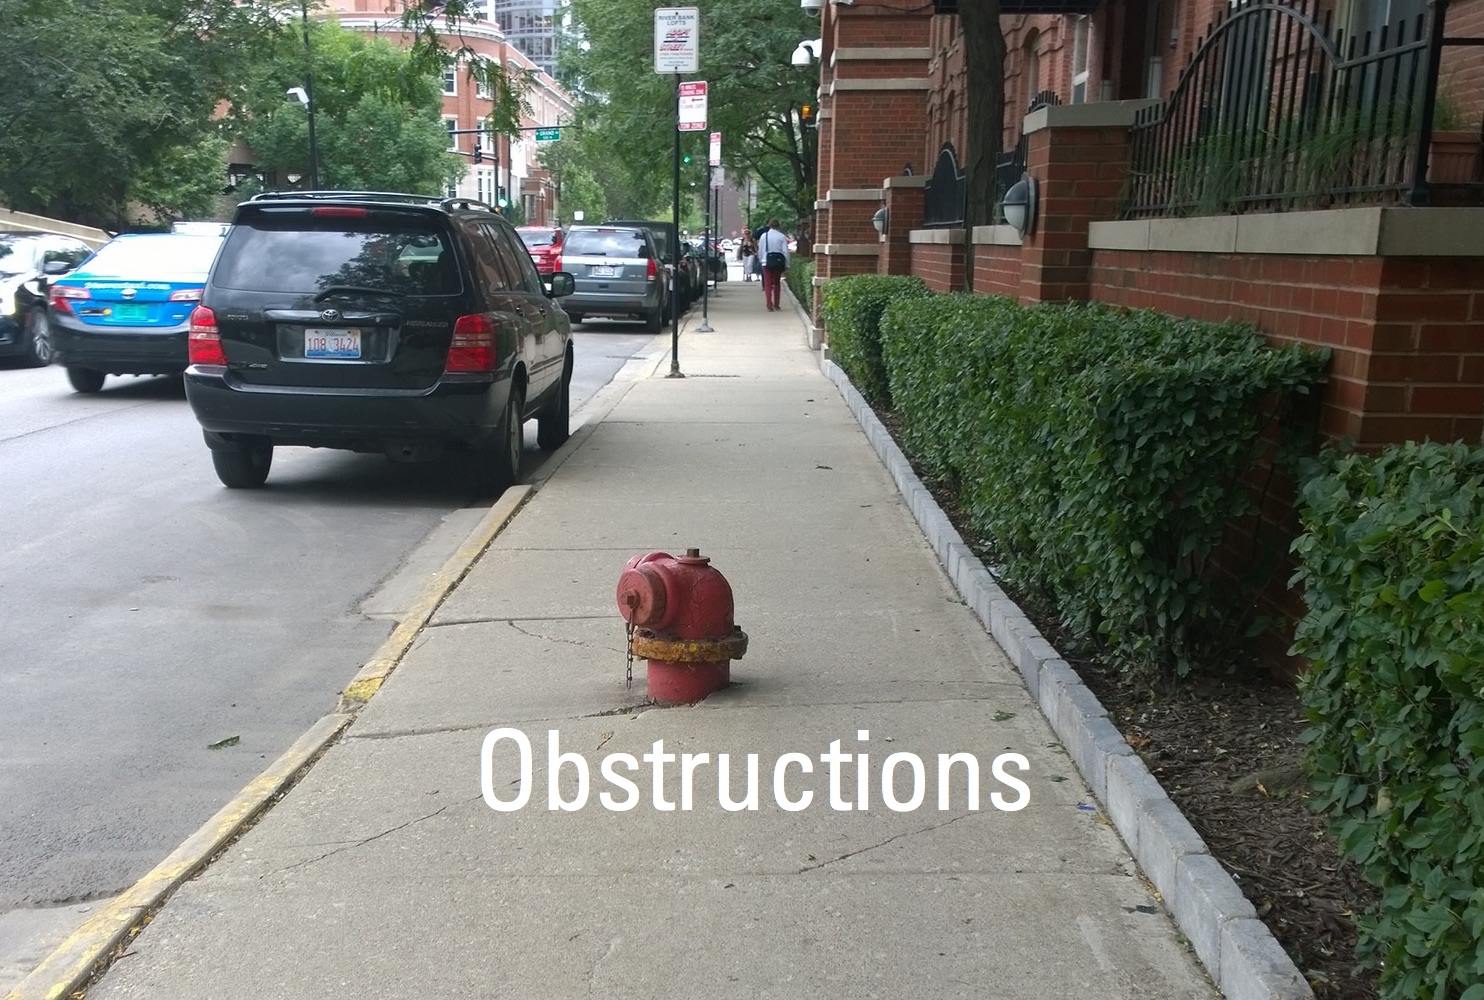 Obstructions